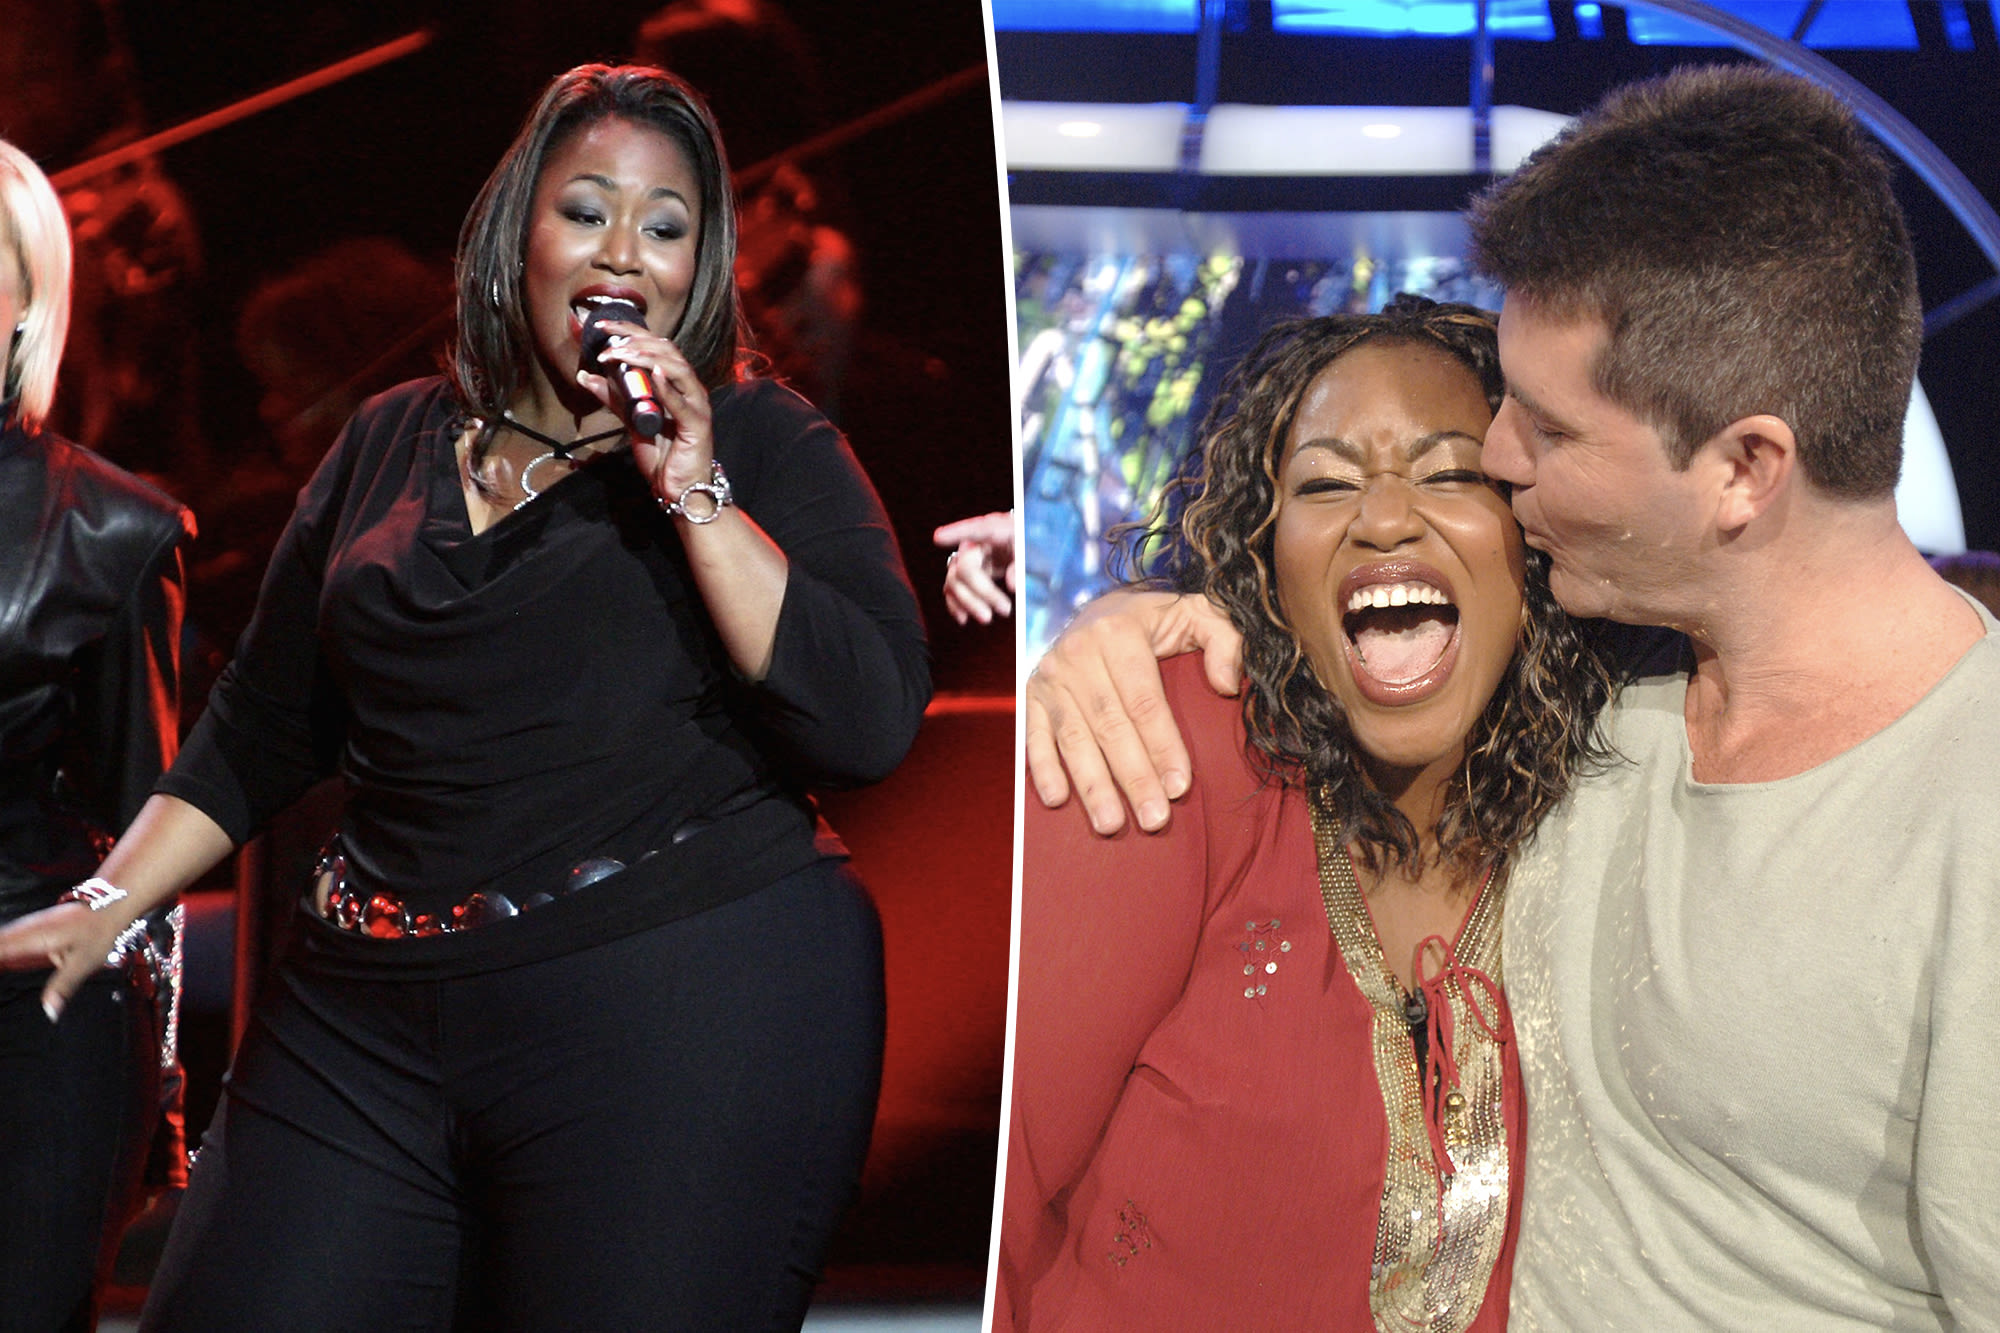 ‘American Idol’ alum Mandisa’s death at age 47 still being investigated: police